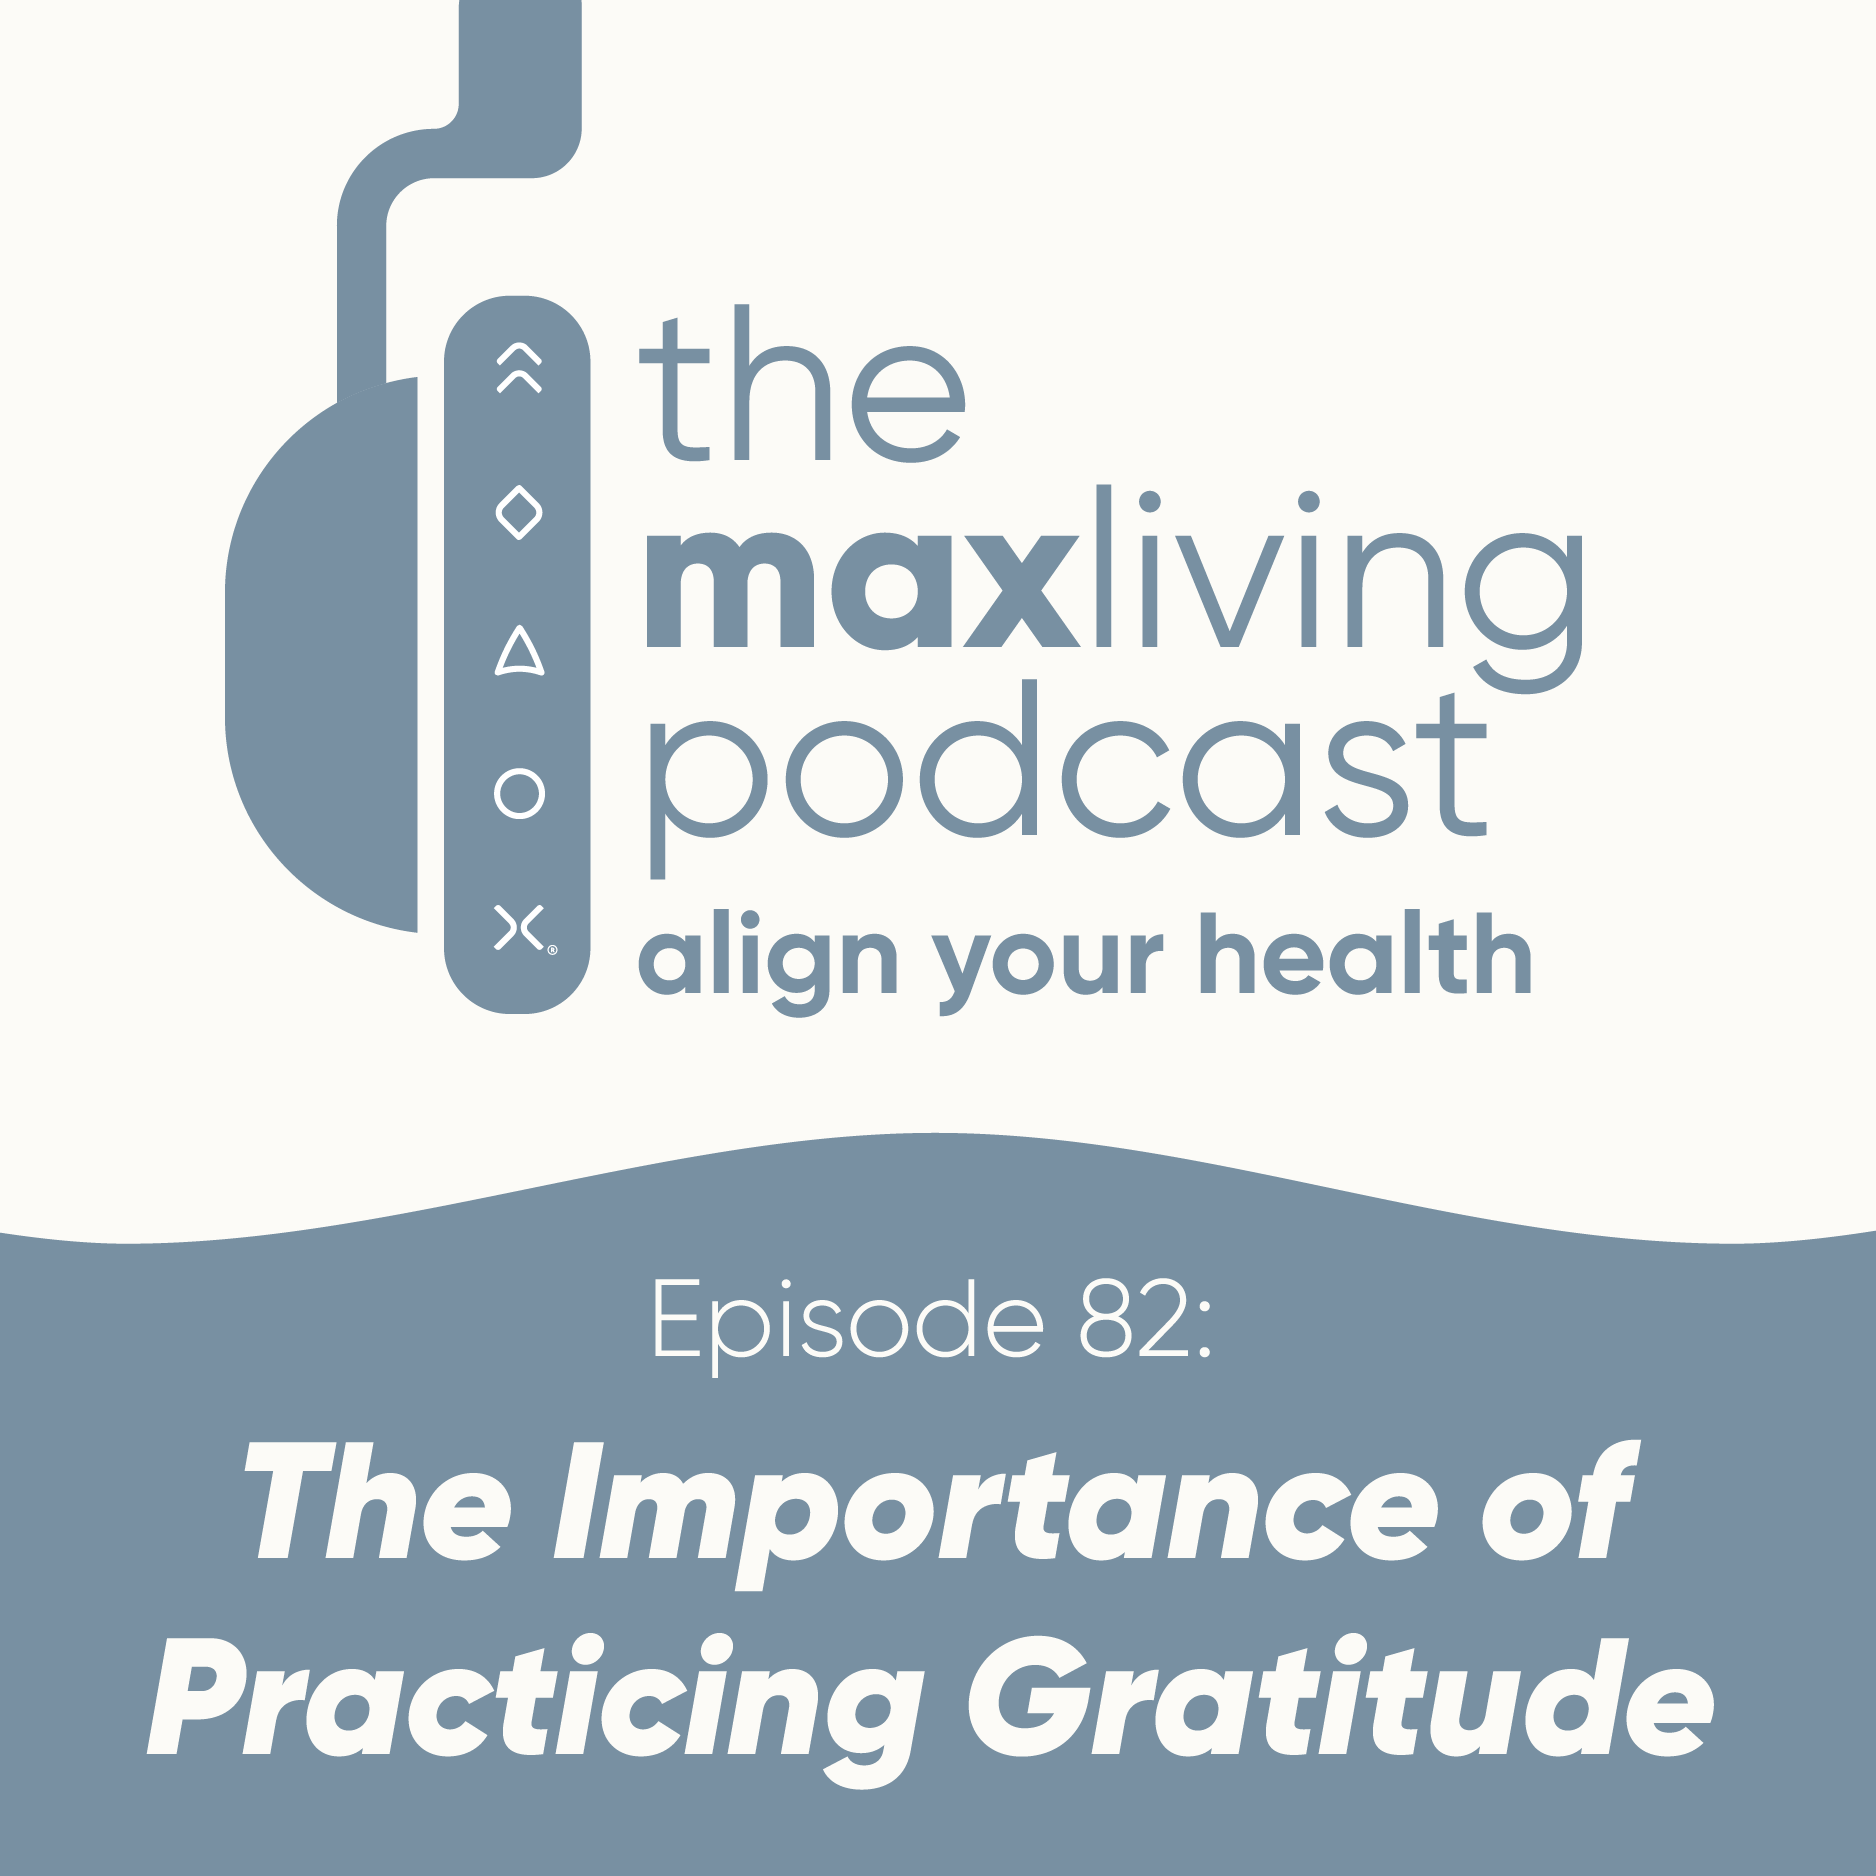 The Importance of Practicing Gratitude